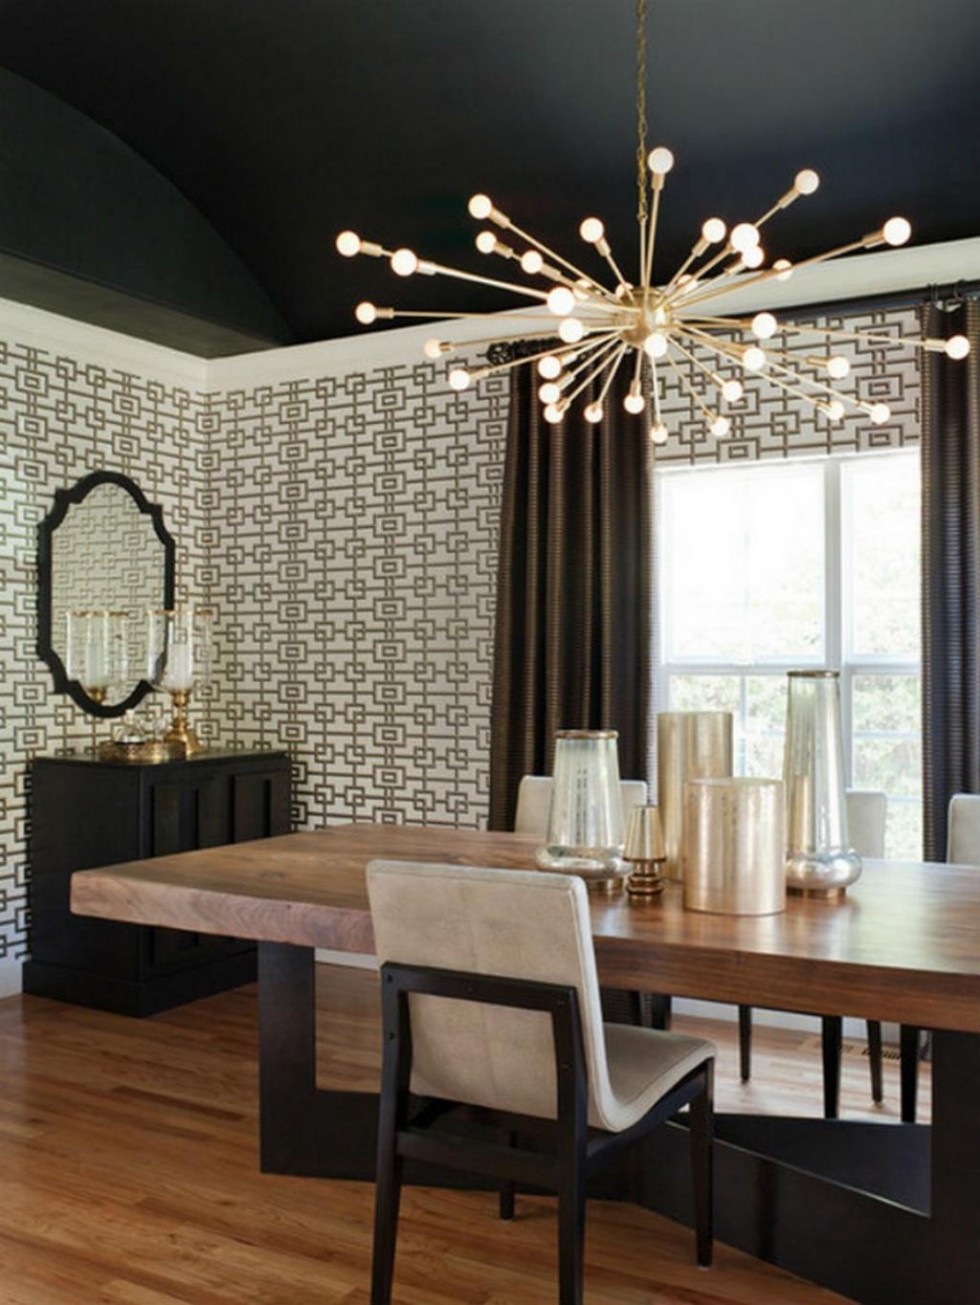 Lighting ideas for your luxury dining room
